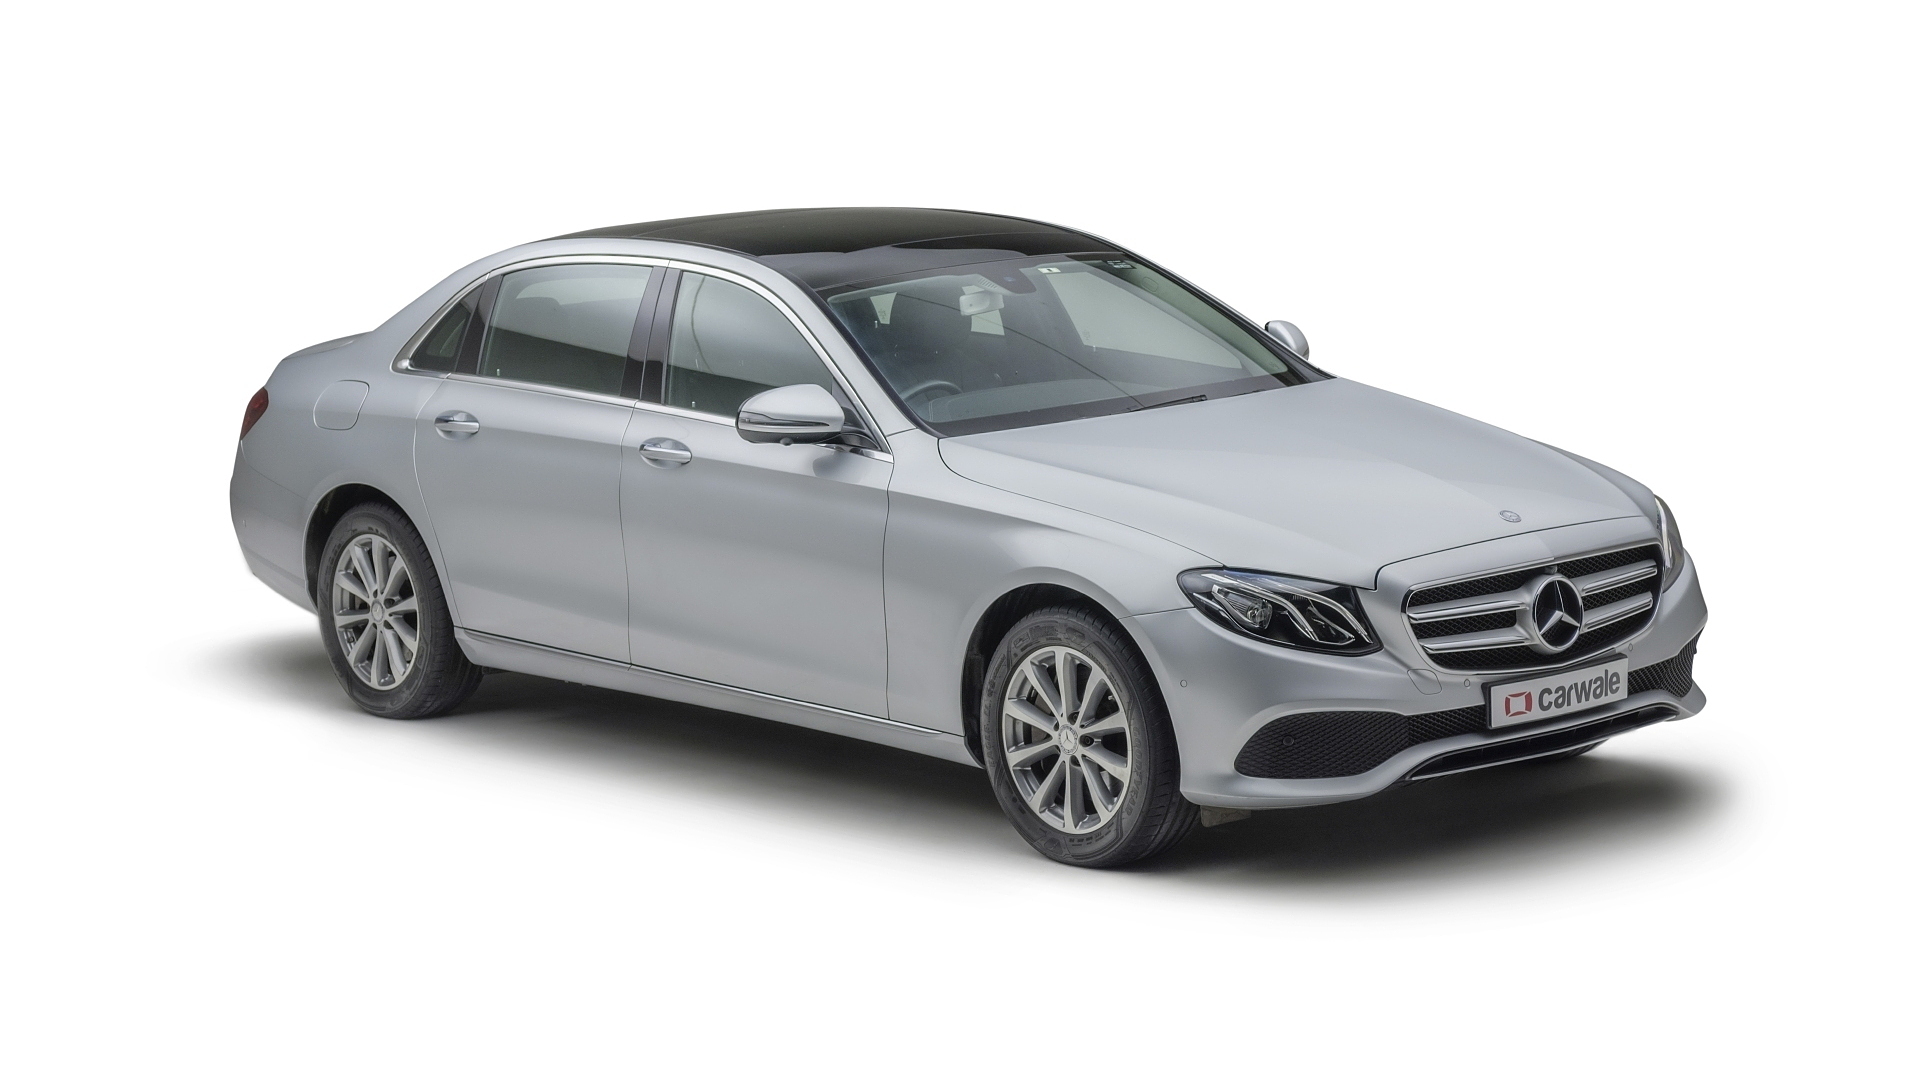 Mercedes Benz E Class 17 21 E 350d Elite Price In India Features Specs And Reviews Carwale